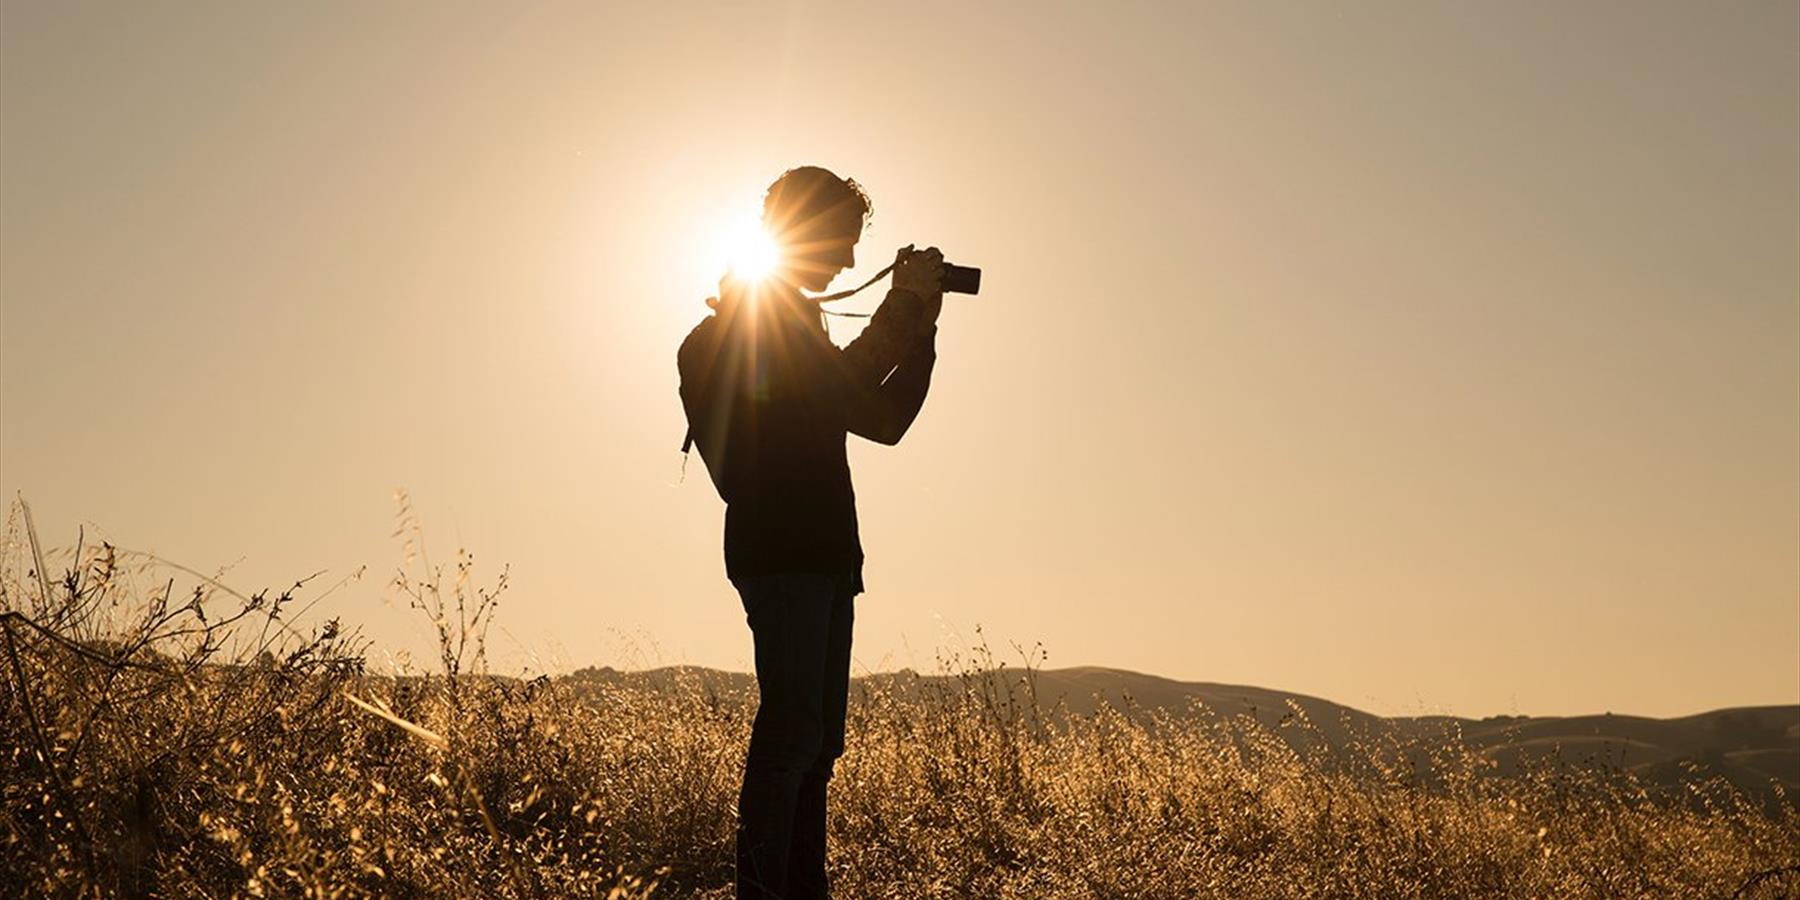 Person taking photographs in an empty field